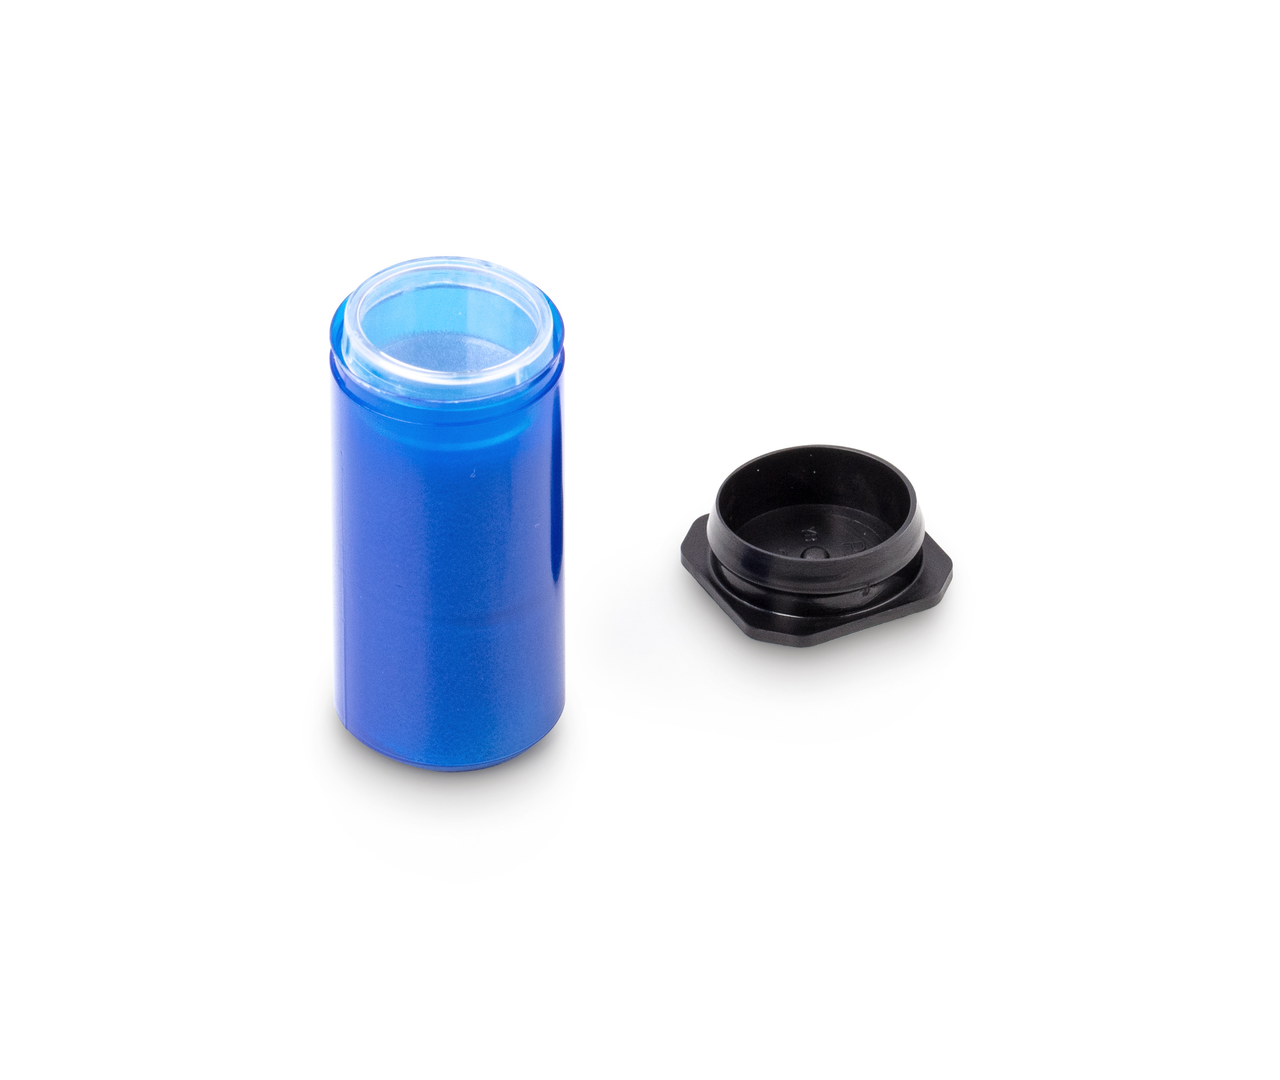 Plastic Weight Case, Button/Compact Weight, 1 To 500mg